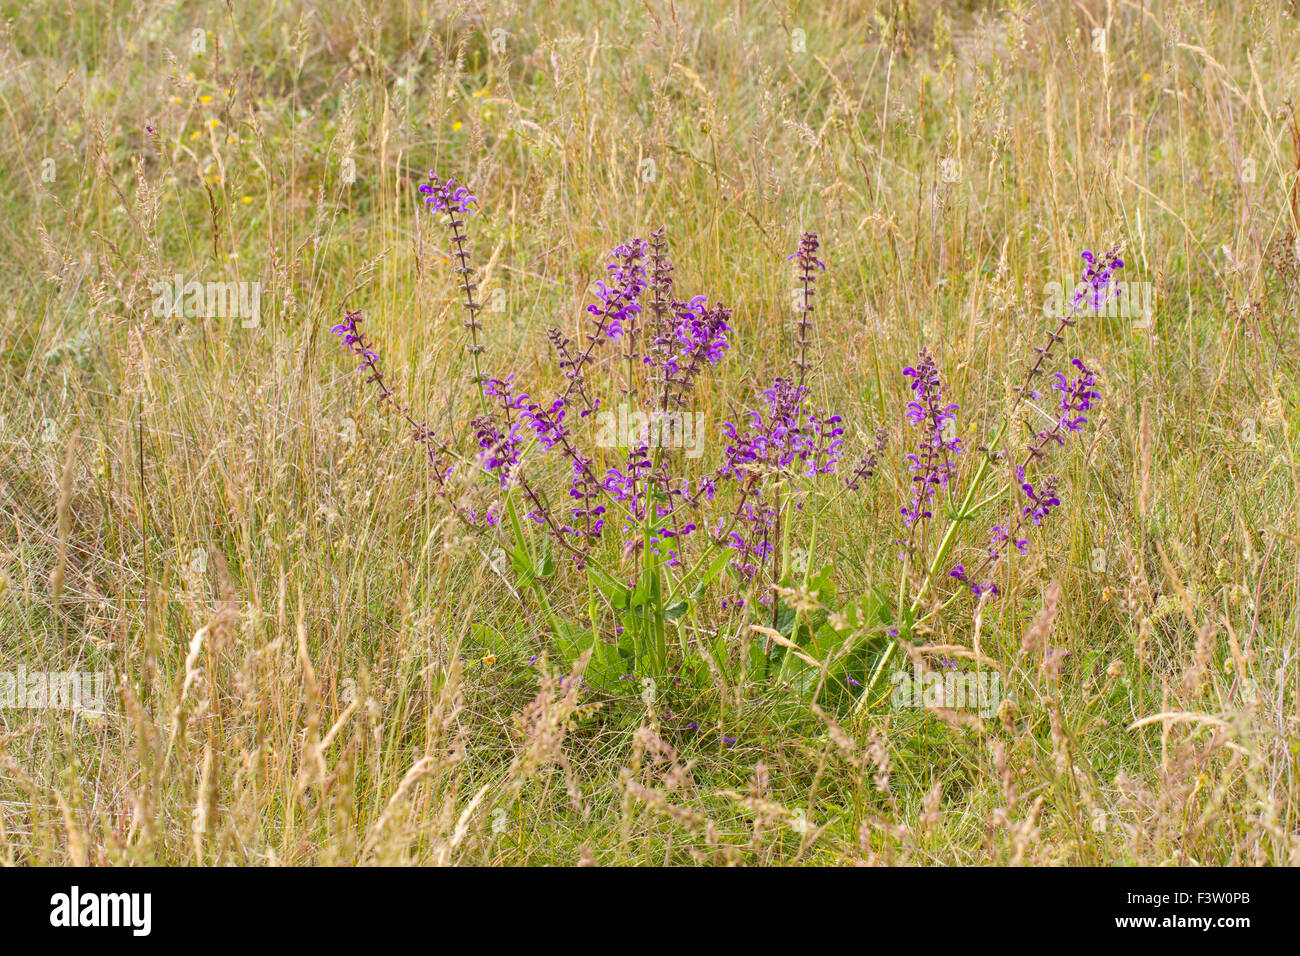 Meadow Clary (Salvia pratensis) plant flowering in a hay meadow. On the Causse de Gramat, Lot region, France. May. Stock Photo